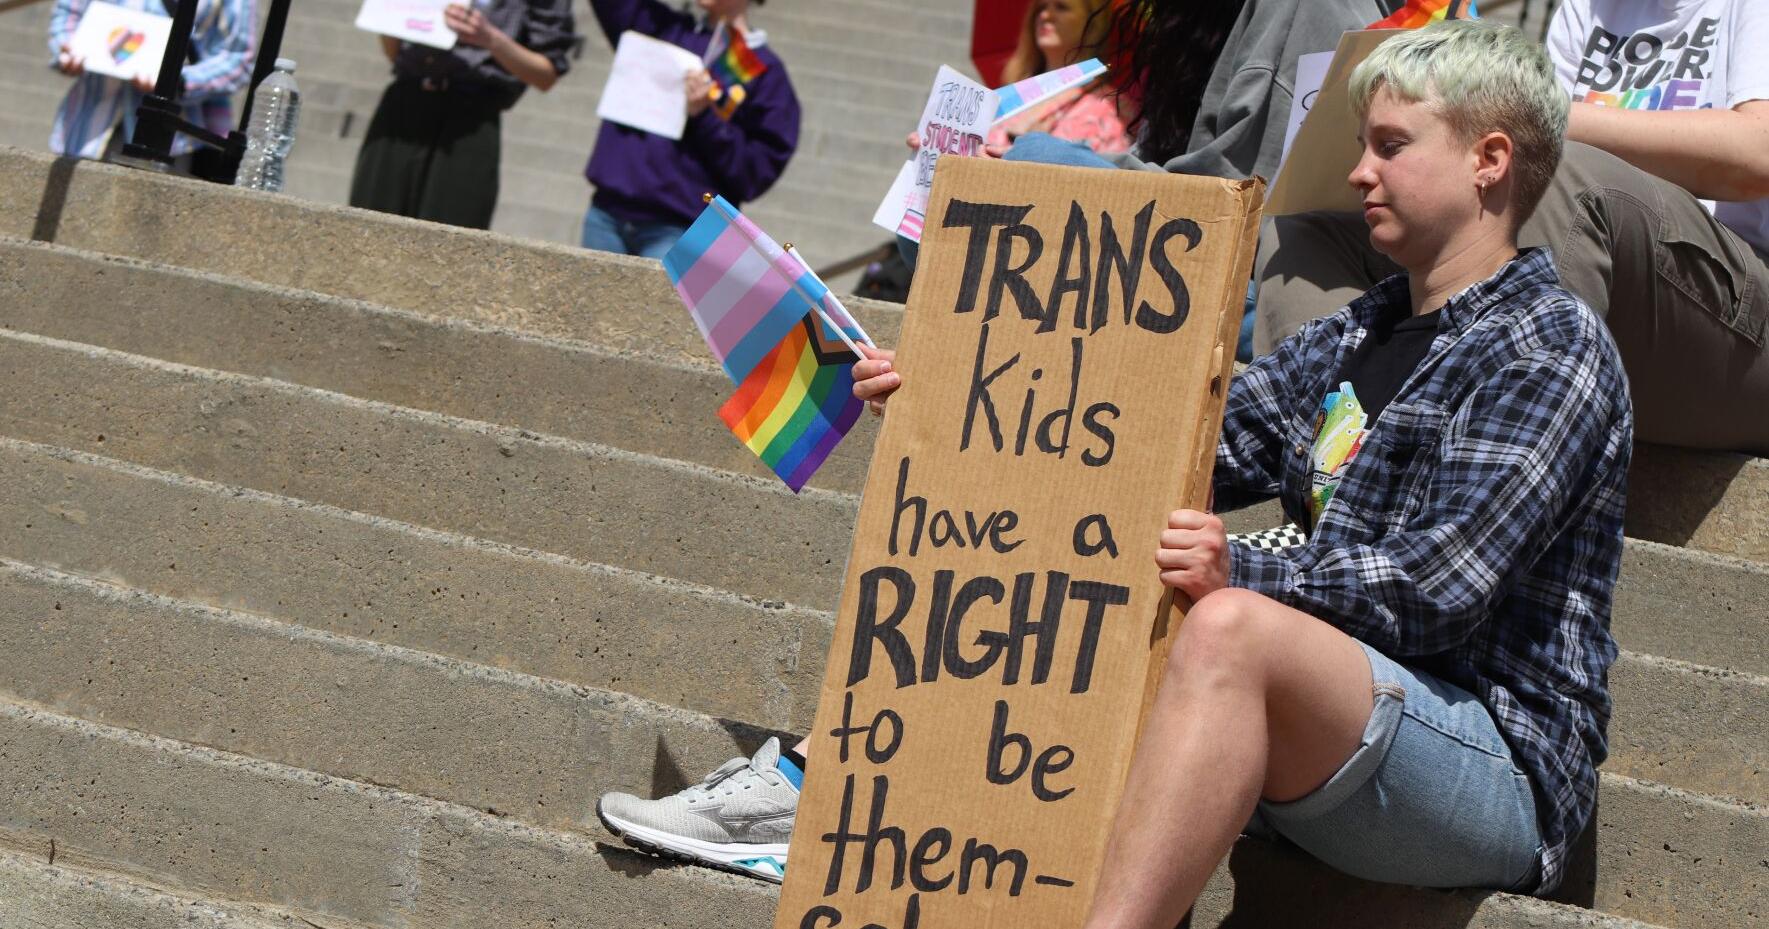 SC Senators move bills stopping hormones for transgender youth and birth certificate changes